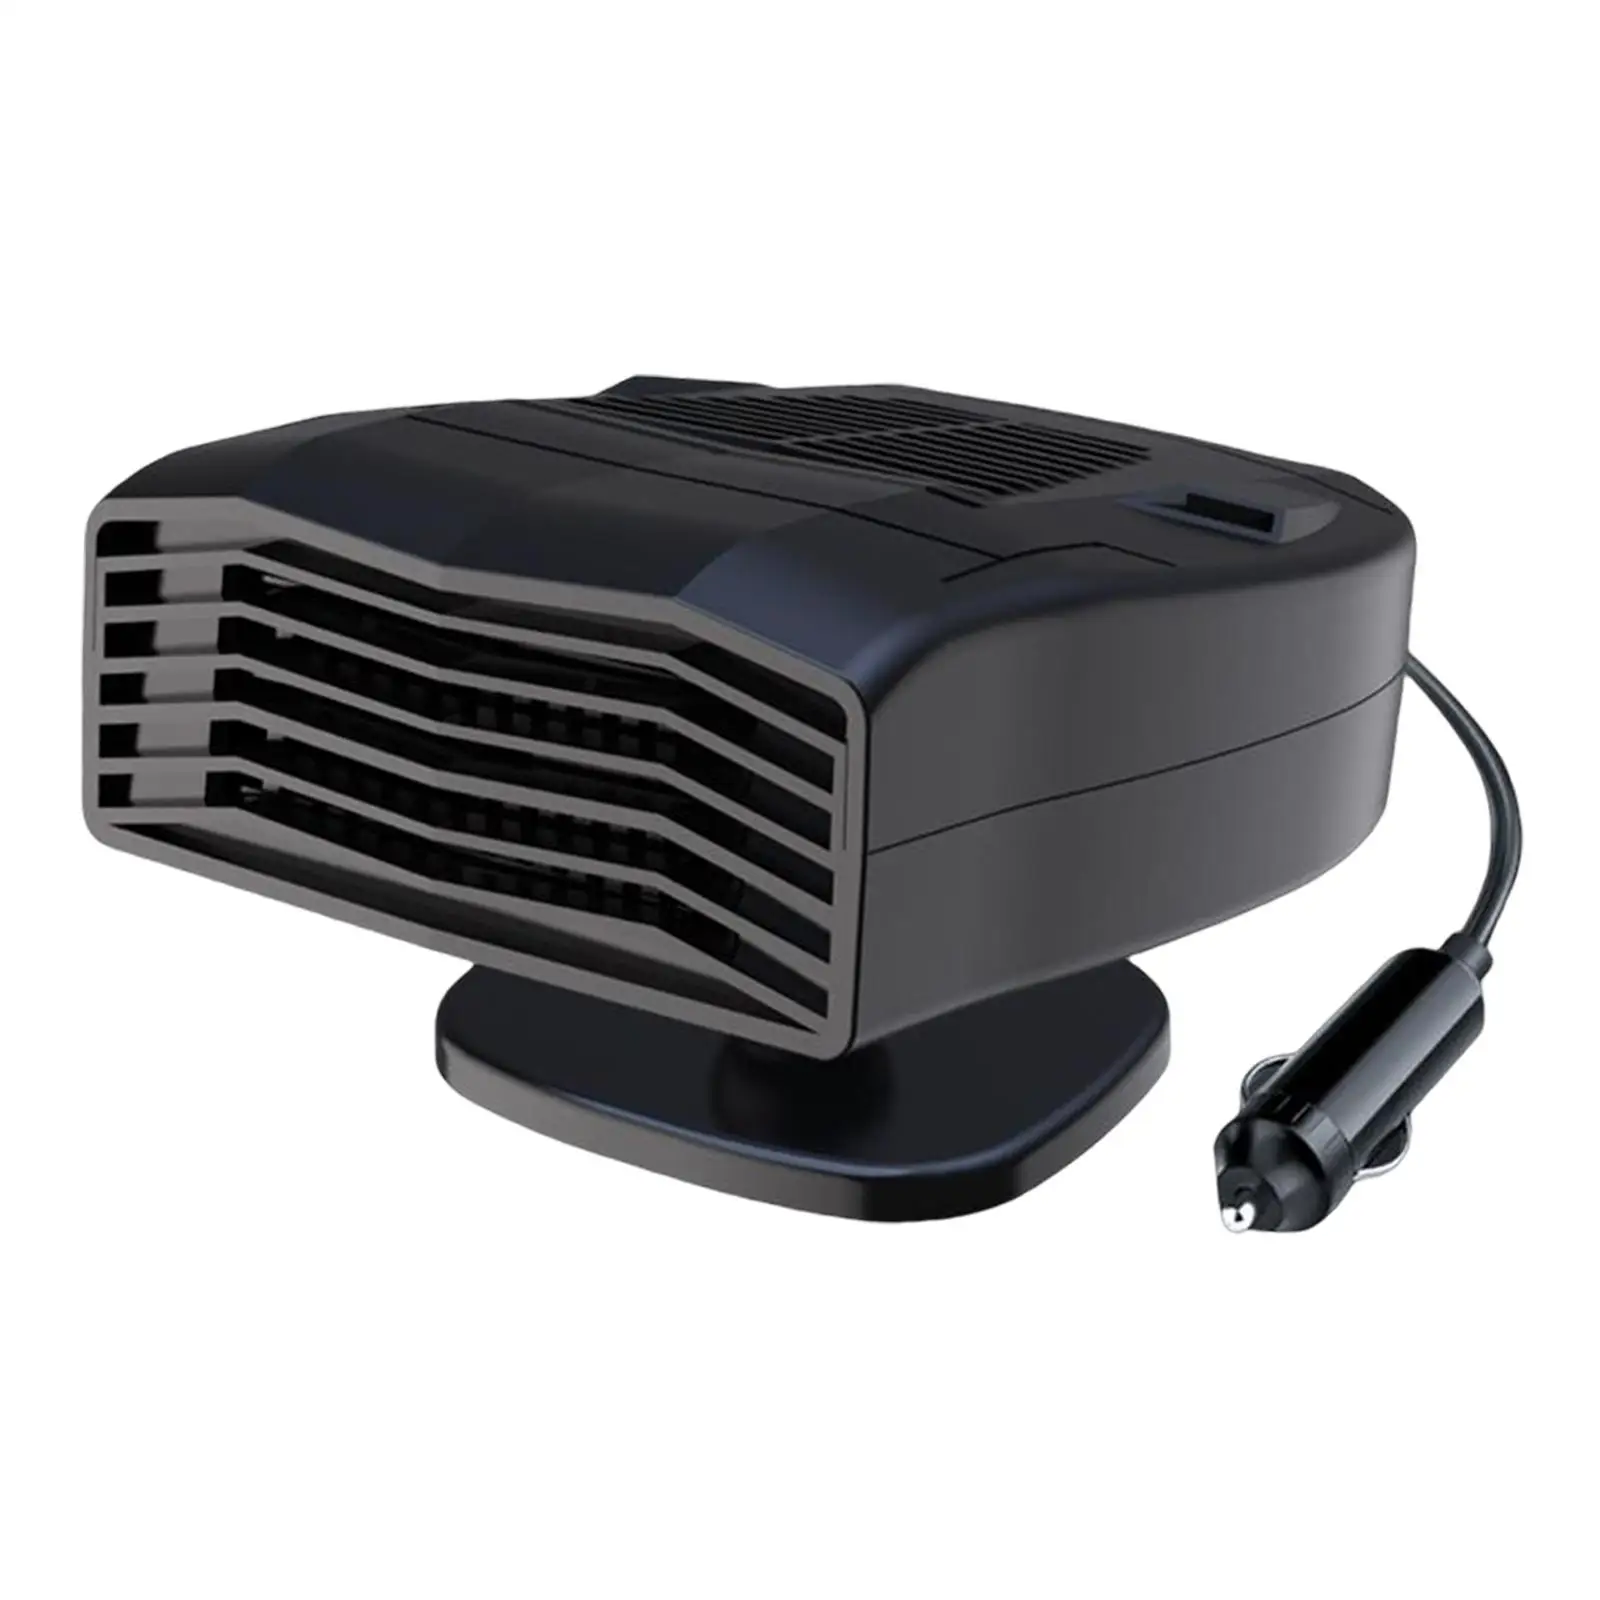 Car Heater 360 Degree Rotating Windshield Defrosting for Automobile Bus